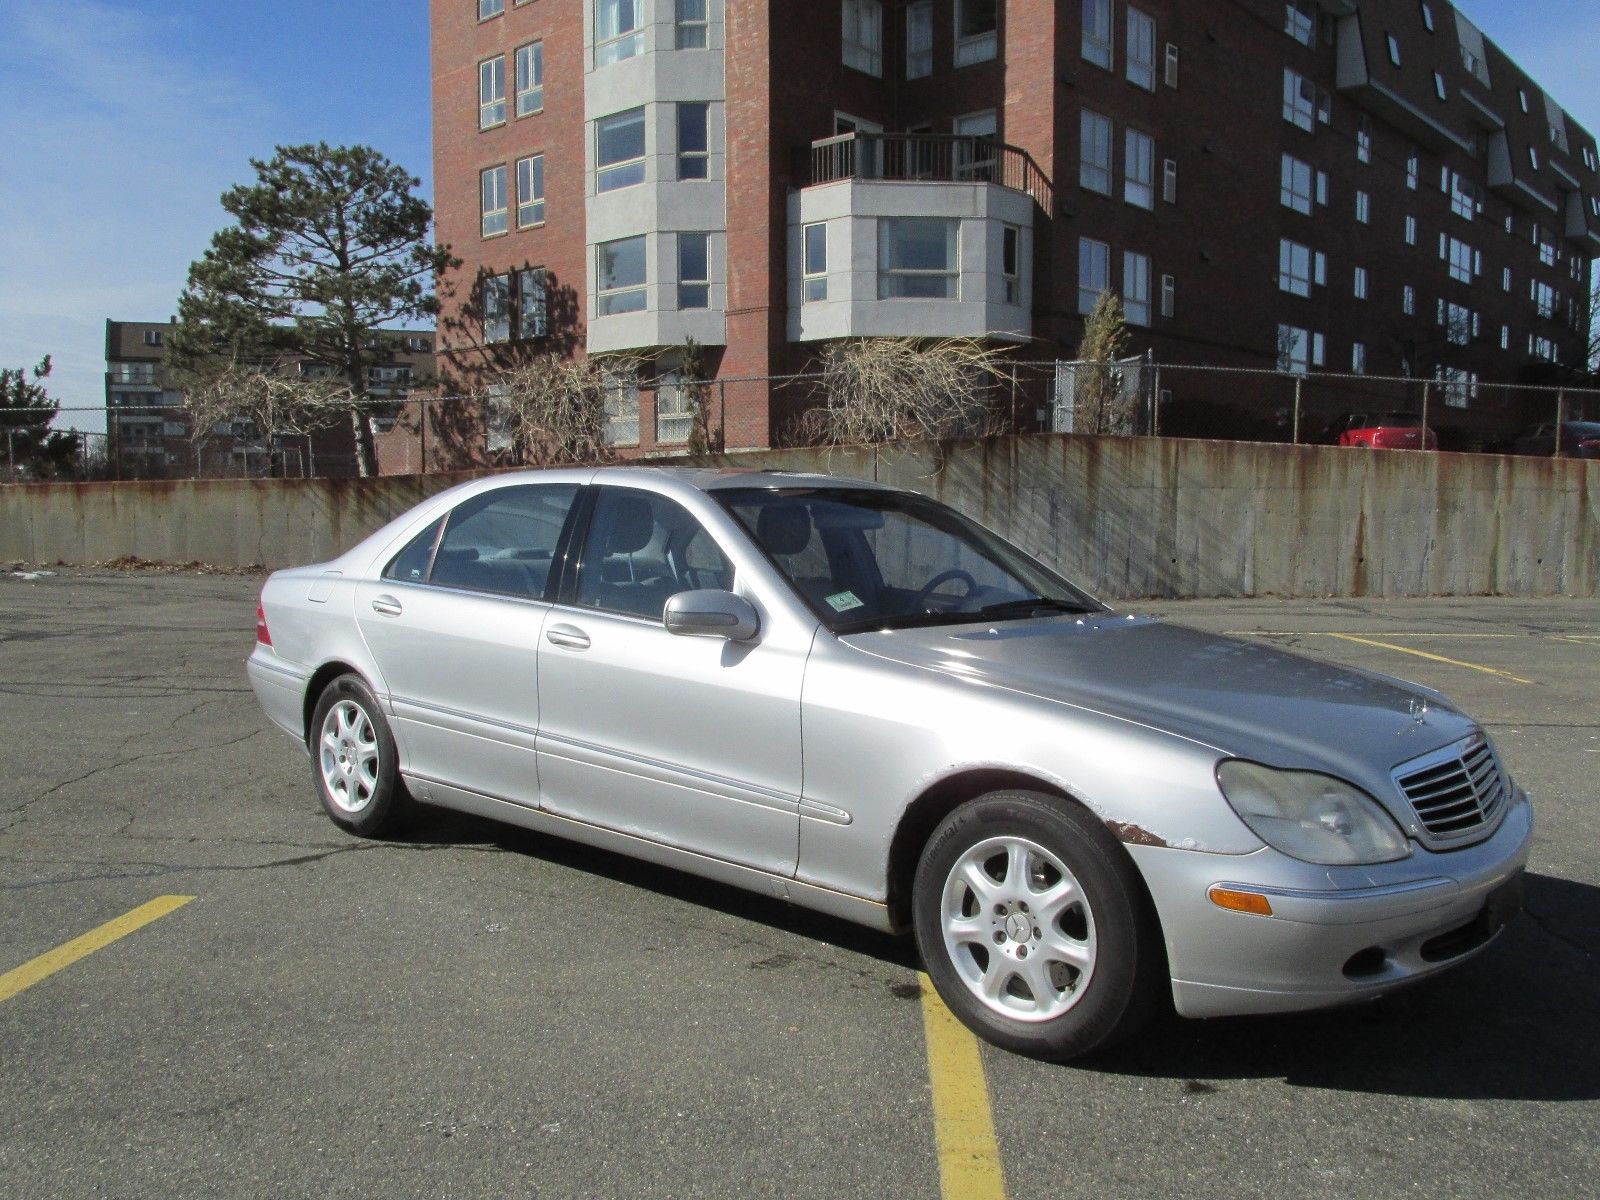 2002 Mercedes Benz S Class S500 2002 Mercedes S500 Sedan 5 0l V8 Auto Rwd 115k No Reserve 2018 2019 Is In Stock And For Sale 24carshop Com